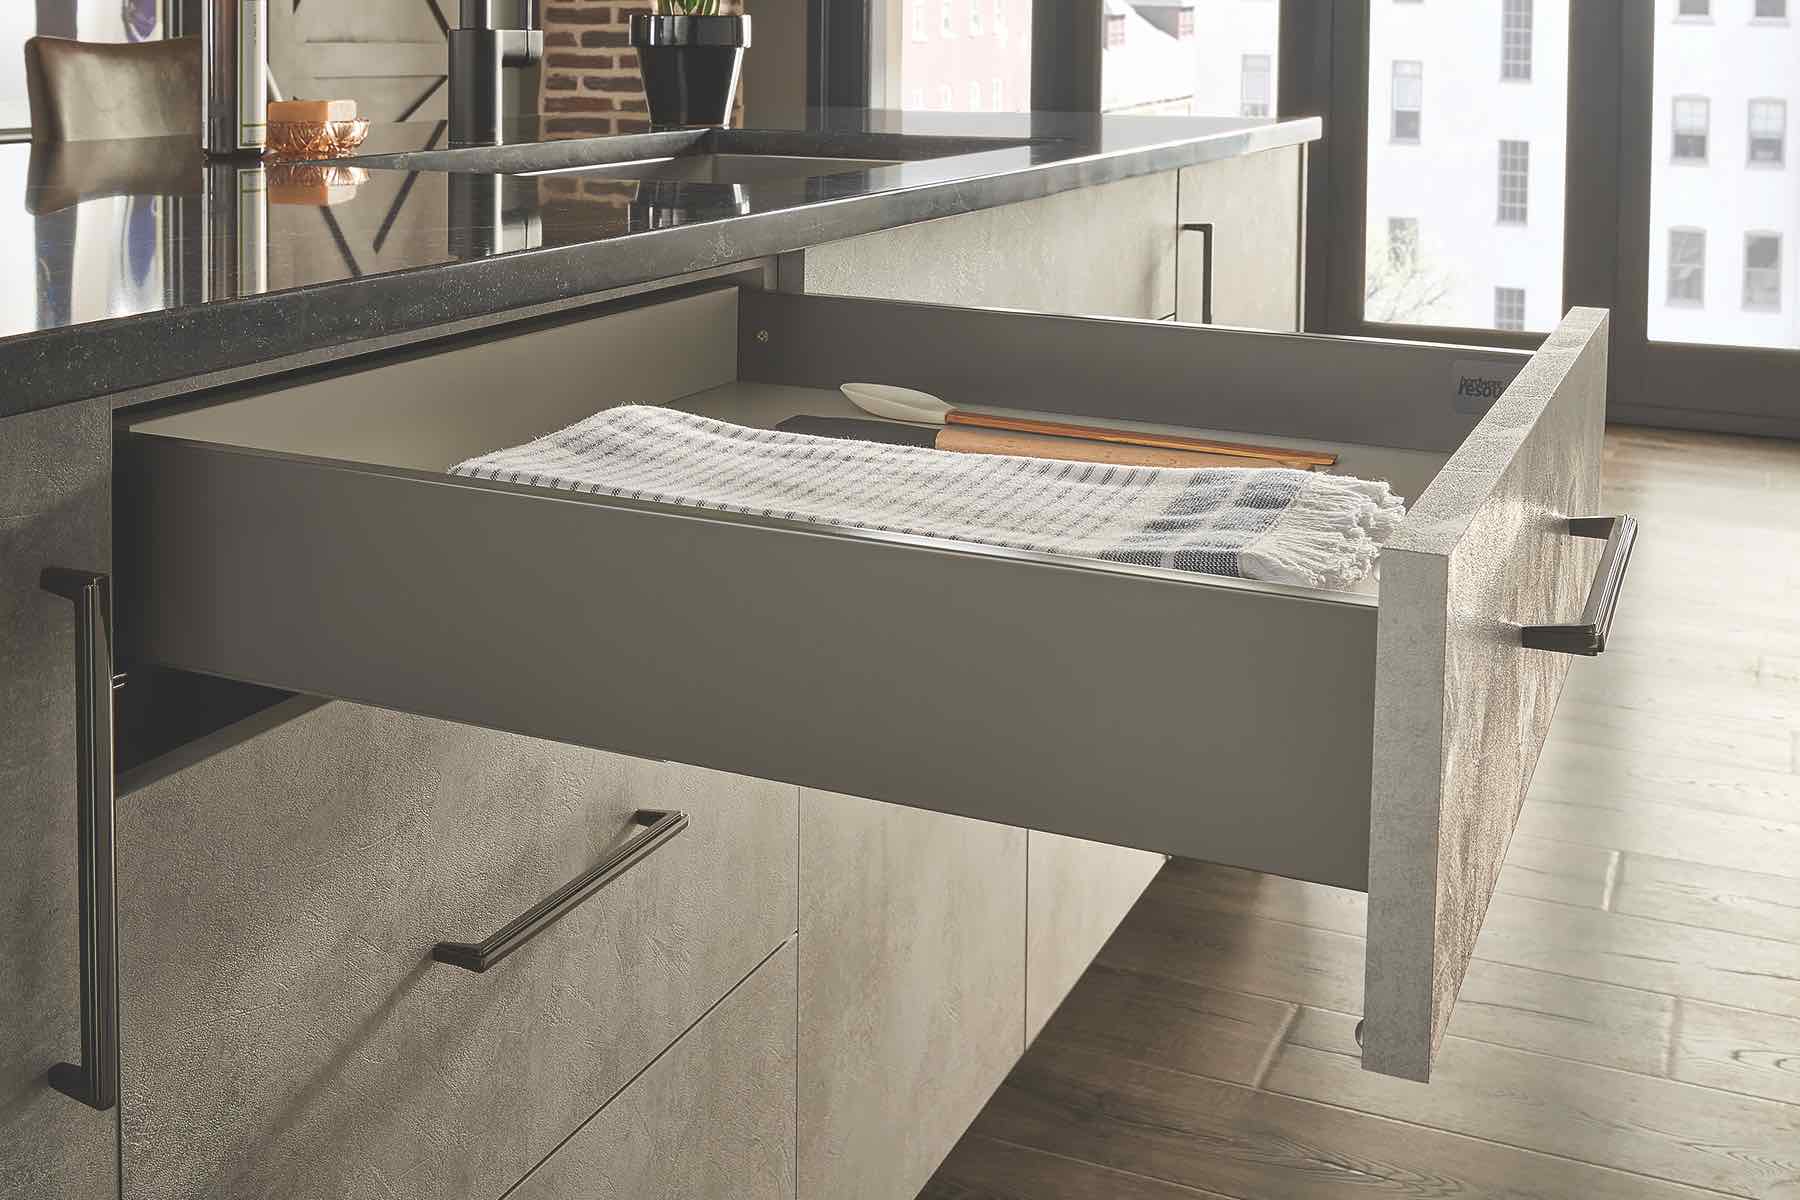 The Dura-Close cabinet drawer system from Hardware Resources can be used with frameless or face-frame cabinets. Constructed with double-wall solid steel drawer boxes, finished with slate-gray powder coat, and built on full-extension, soft-close 100-pound dynamic weight rating undermount slides, the system’s wall profile is ½ inch smaller to provide more storage space than traditional A-frame metal-drawer box systems.